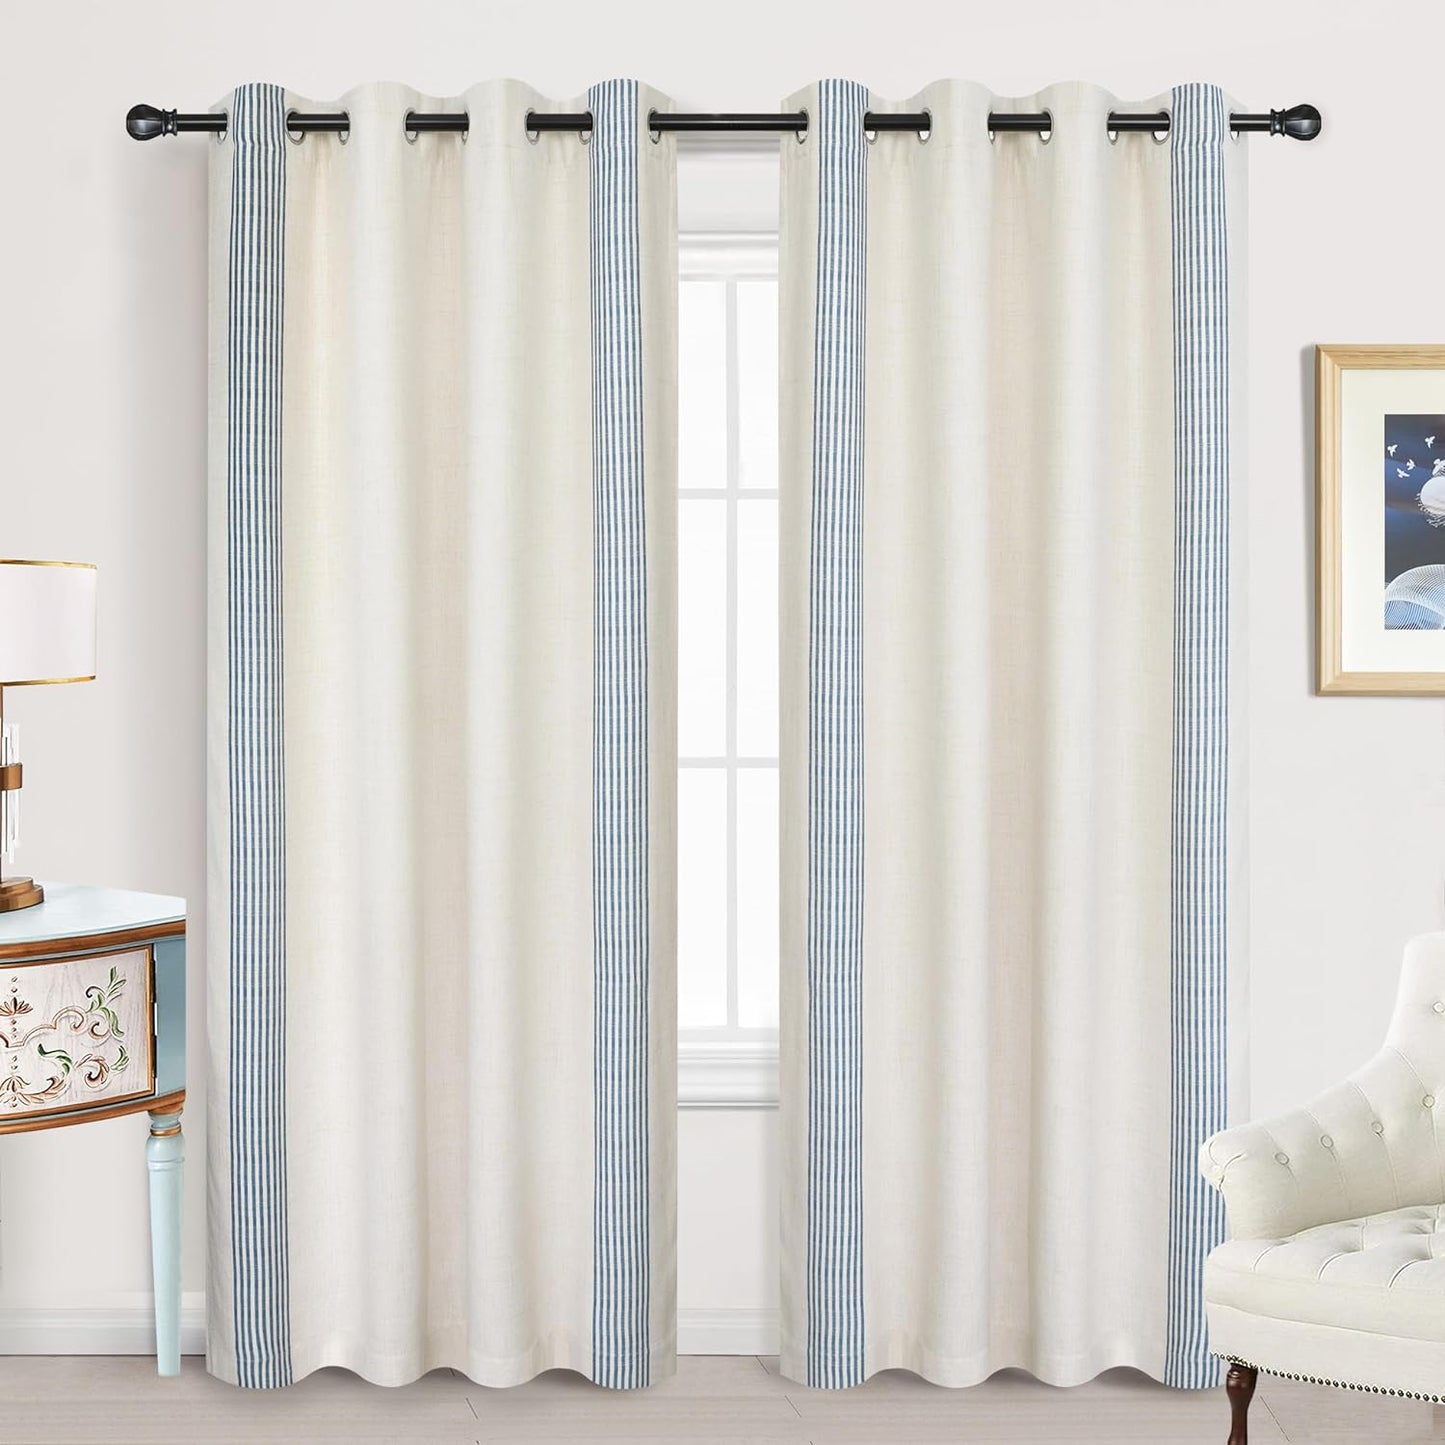 Driftaway Chris Vertical Striped Pattern Linen Blend Lined Thermal Insulated Blackout and Room Darkening Grommet Linen Curtains for Farmhouse Printed 2 Panels 52 Inch by 96 Inch Jean Navy Curtain  DriftAway Cabana Denim Stripe 52"X84" 